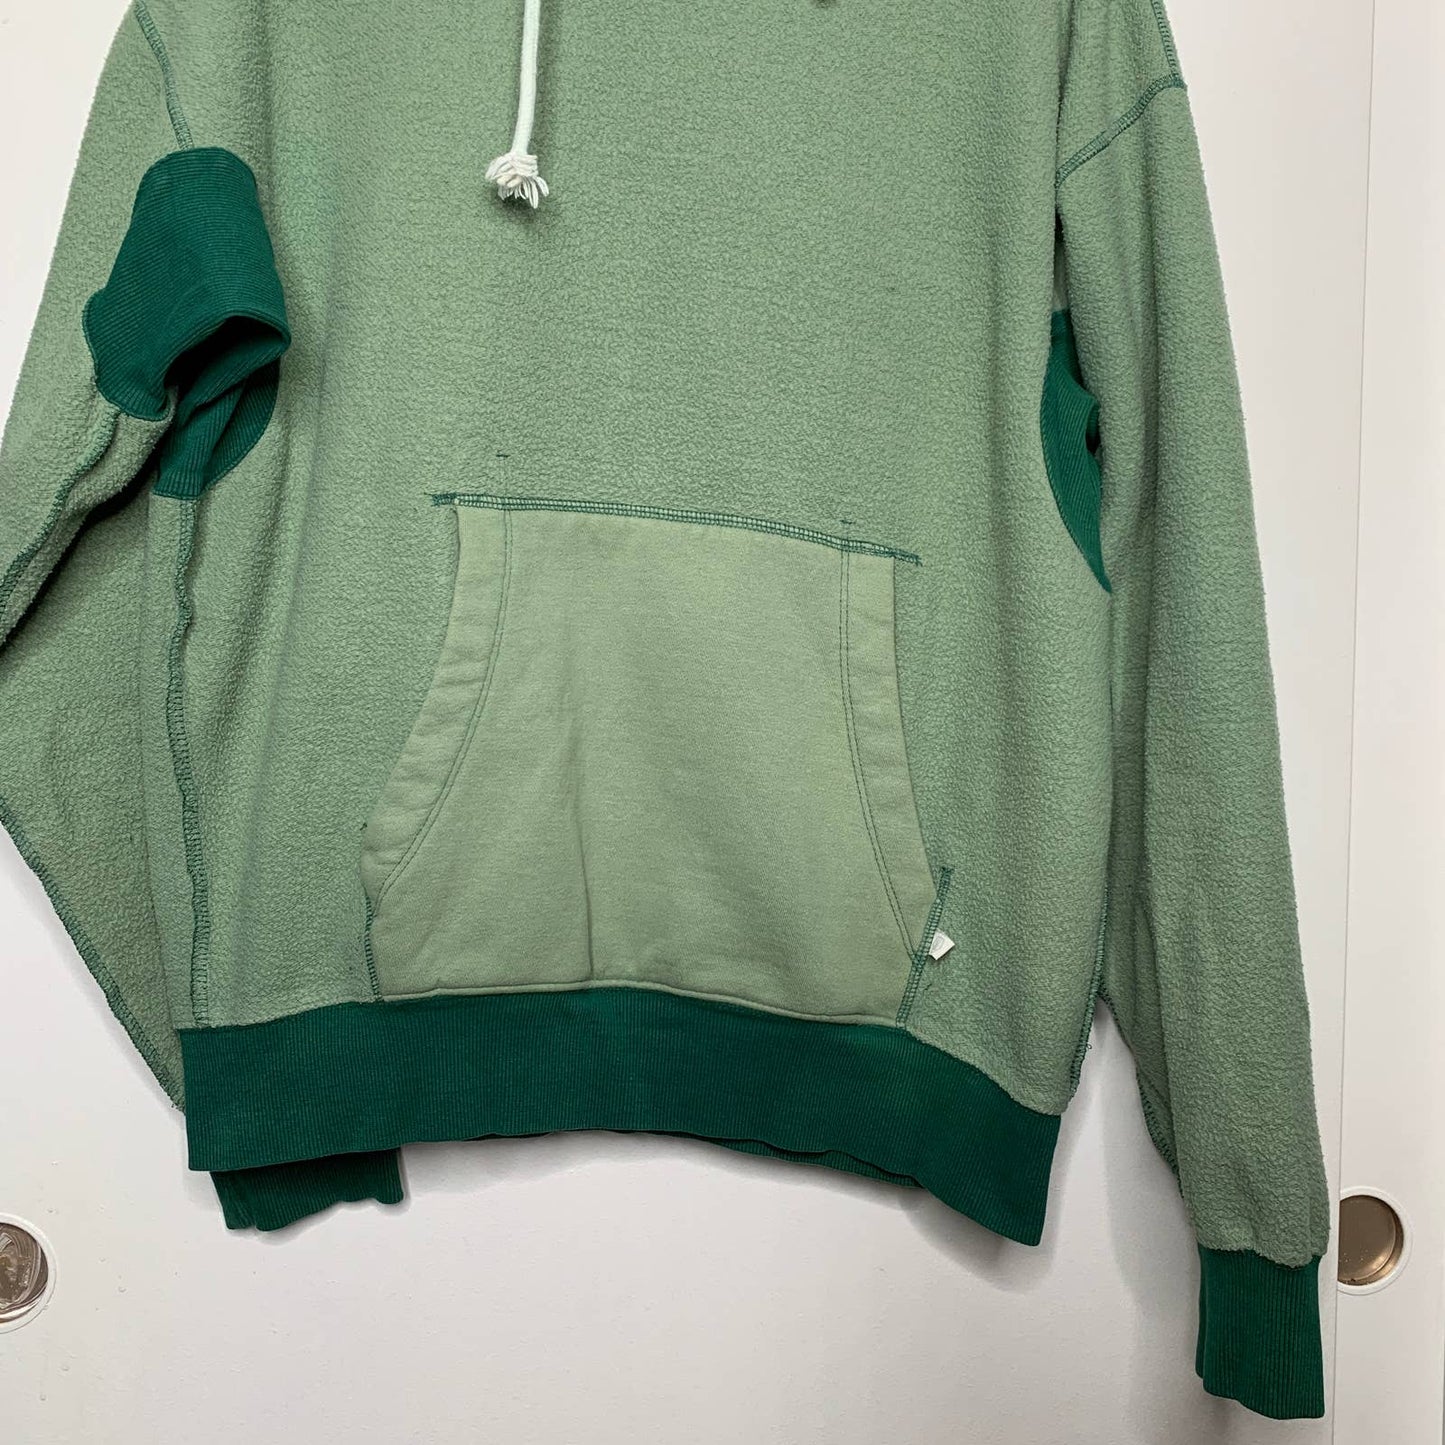 Standard Cloth Reverse Inside Out hoodie SZ S